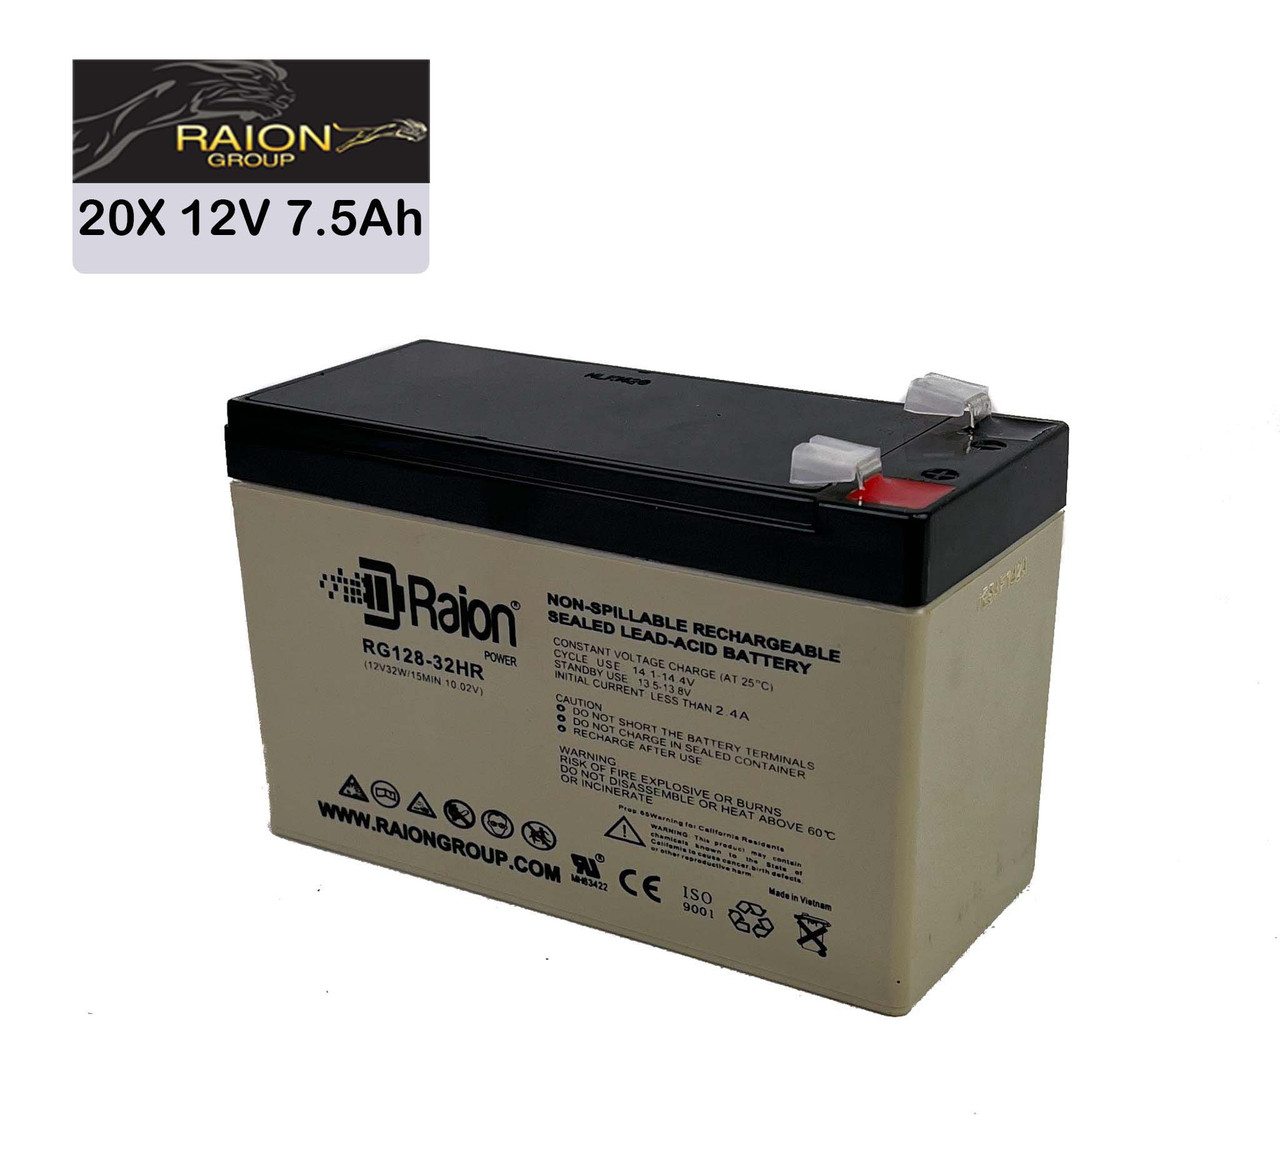 Raion Power 12V 7.5Ah High Rate Discharge UPS Batteries for OPTI-UPS DS6000B - 20 Pack